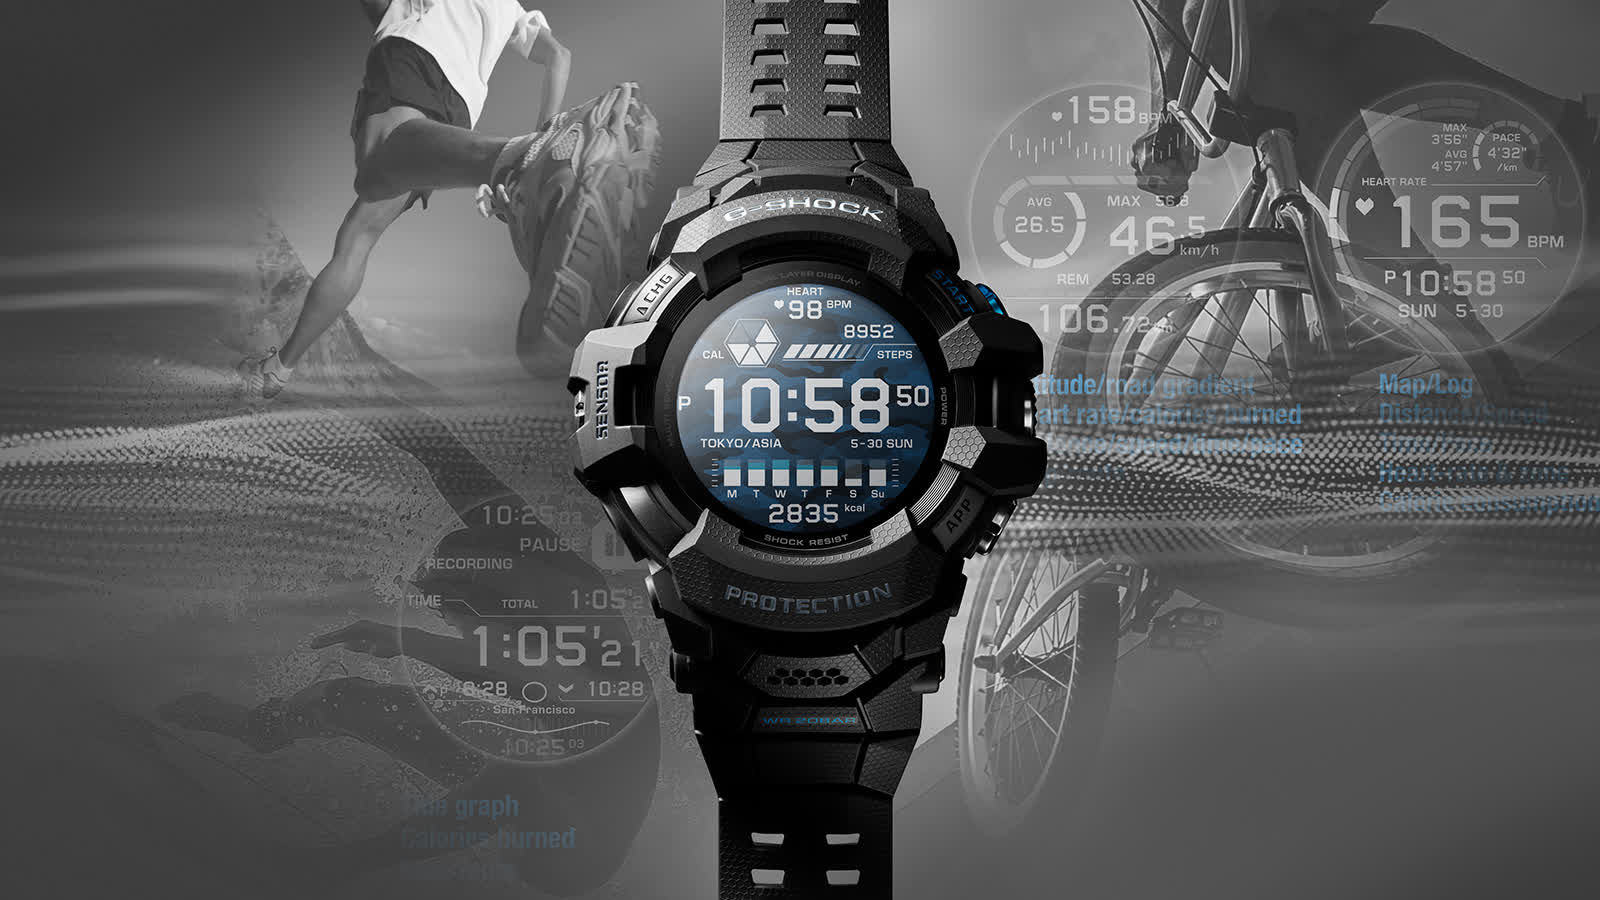 Casio adds Wear OS to latest G-Shock watch for the first time